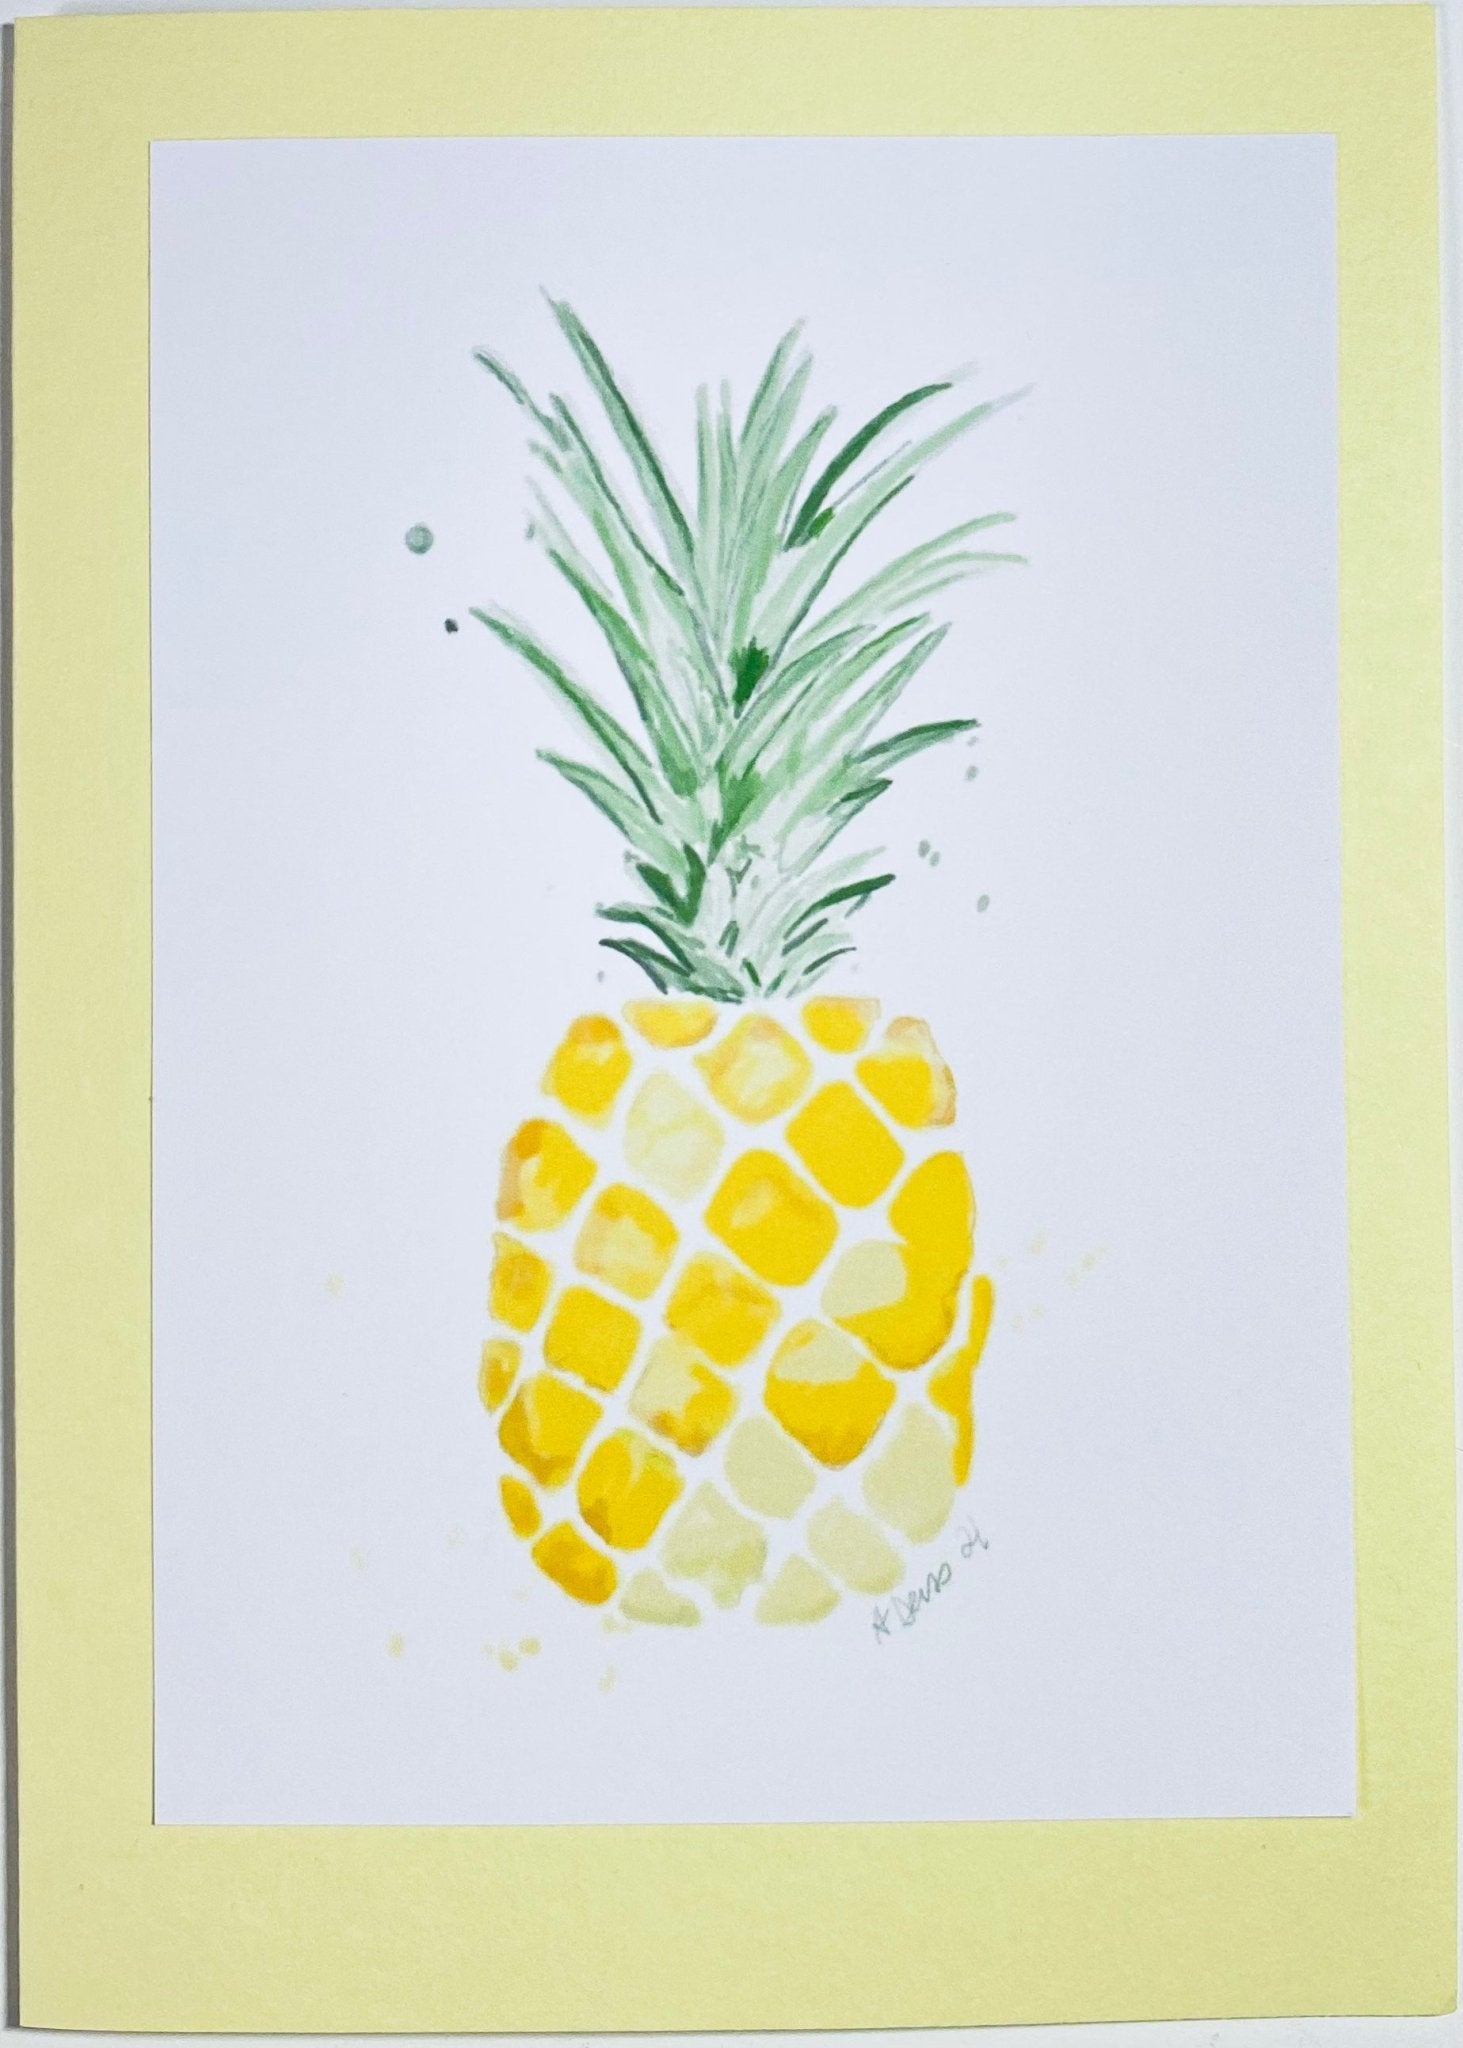 Pineapple Greeting Card (Two Colors Available) - Blue Cava